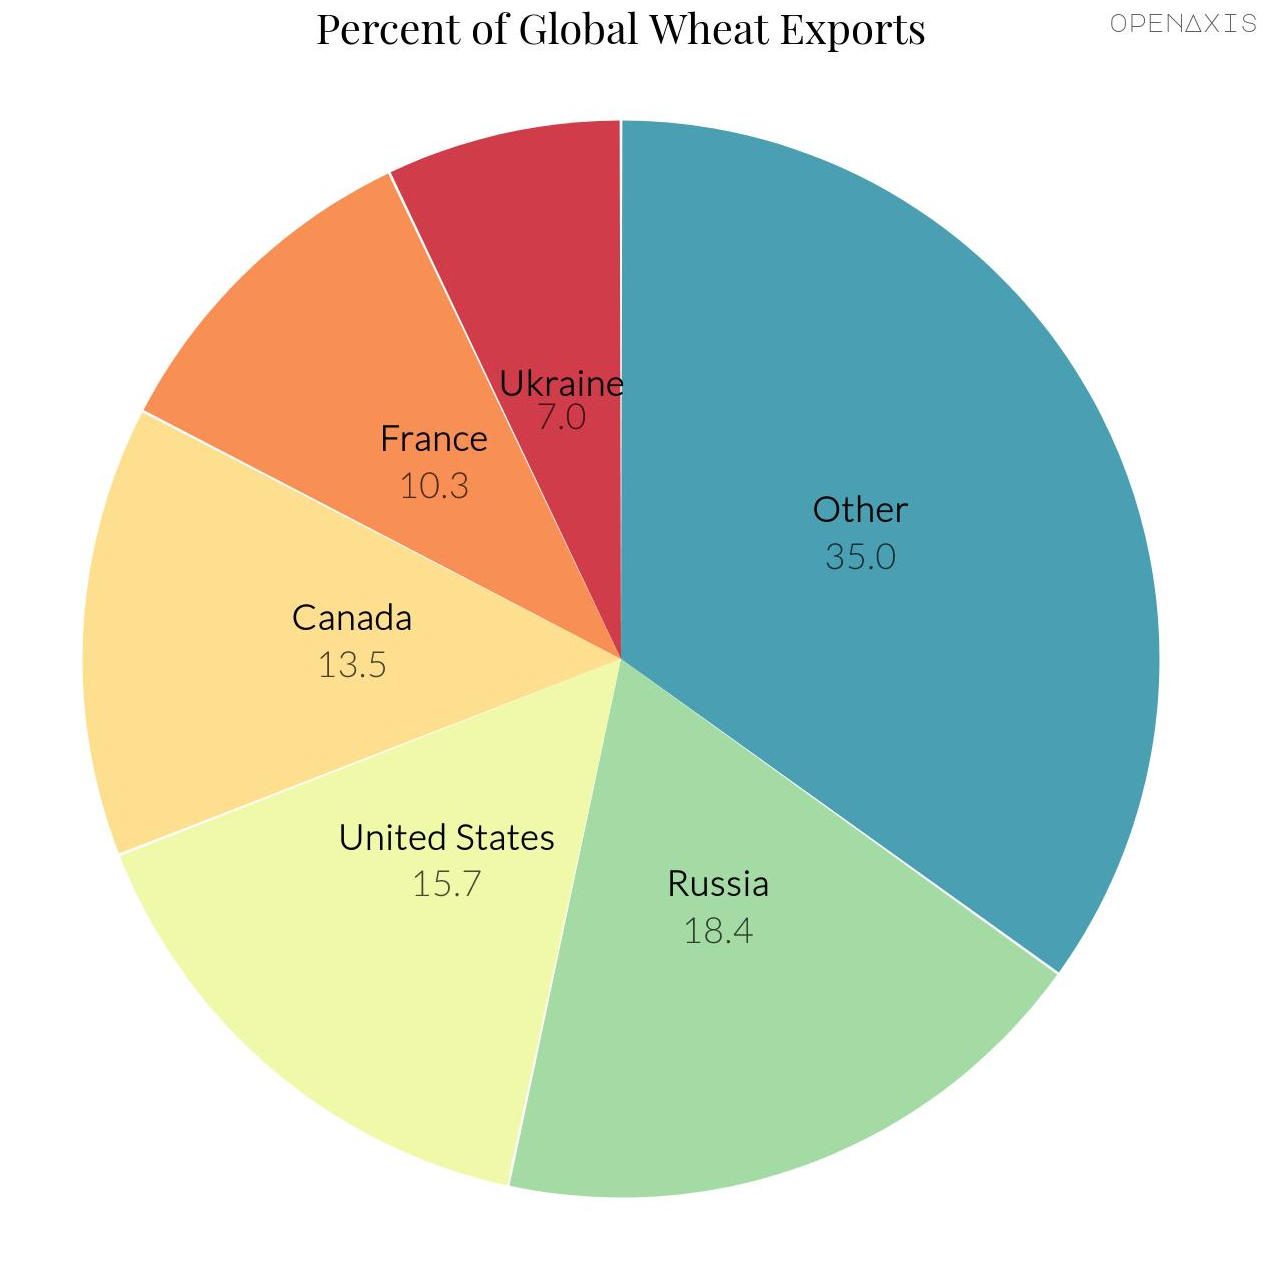 "Percent of Global Wheat Exports"